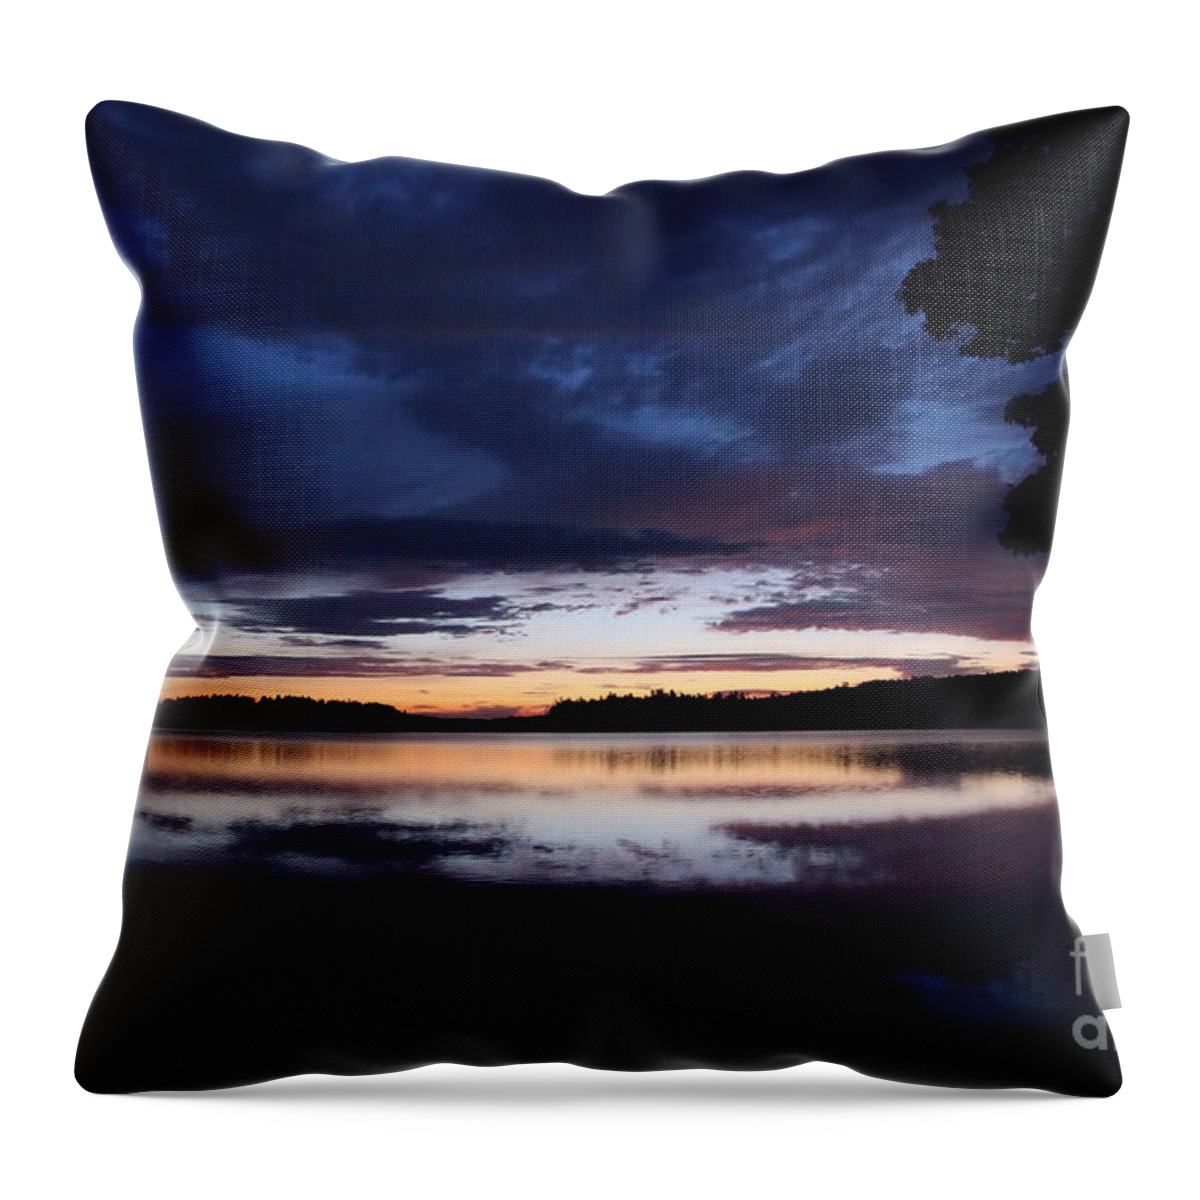 Landscape Throw Pillow featuring the photograph Greeting The Dawn by Sandra Huston